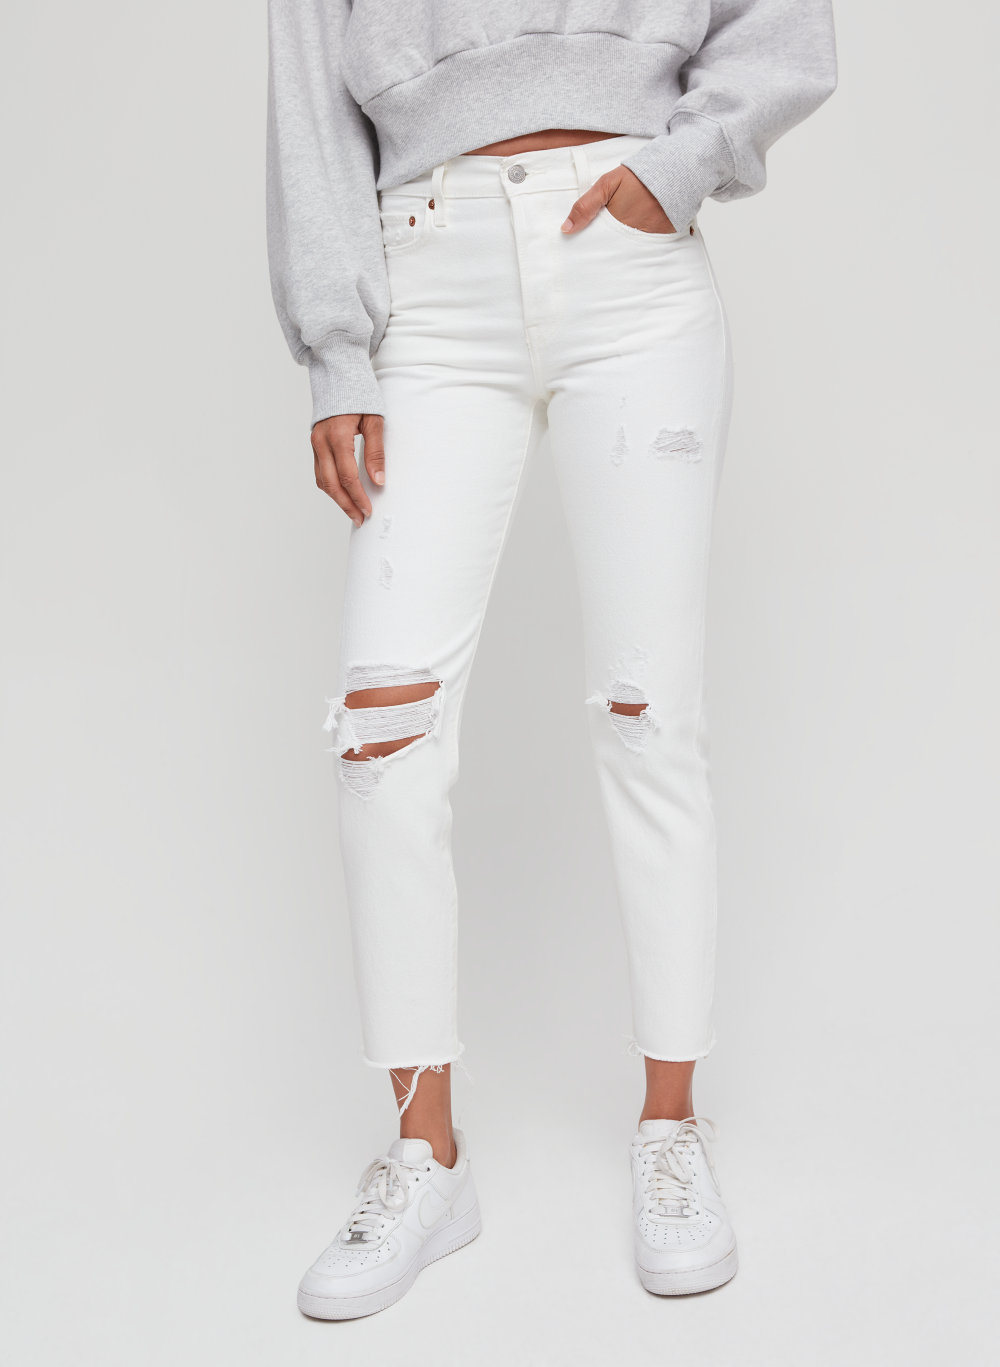 white levi ripped jeans